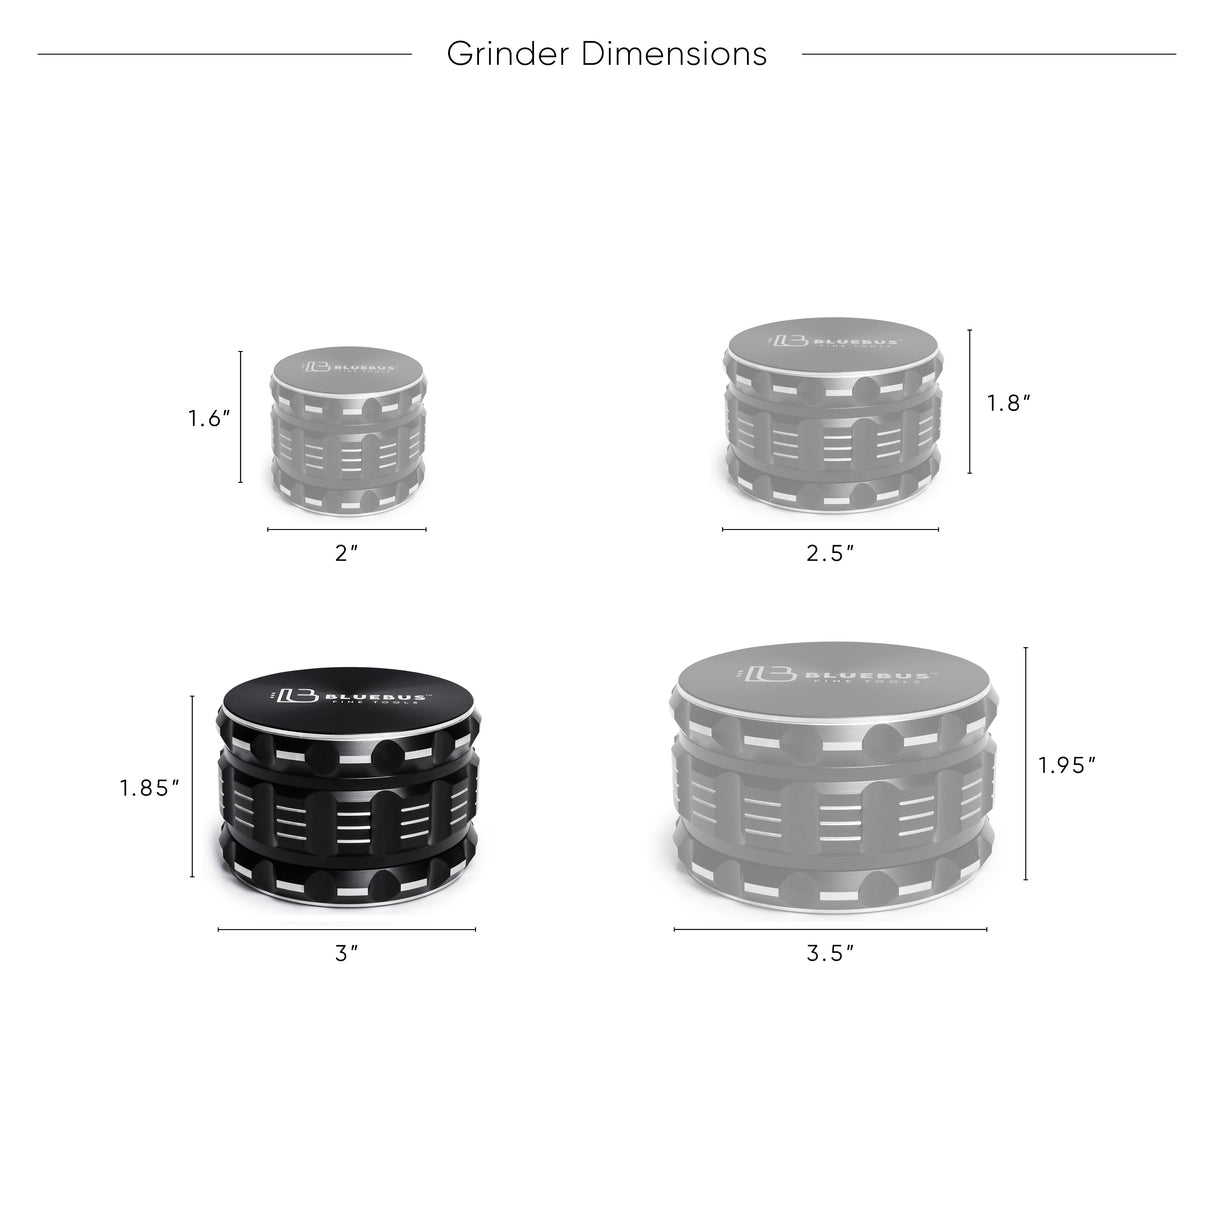 GA Aluminum Grinder collection by Blue Bus fine tools in various sizes from 2" to 3.5"